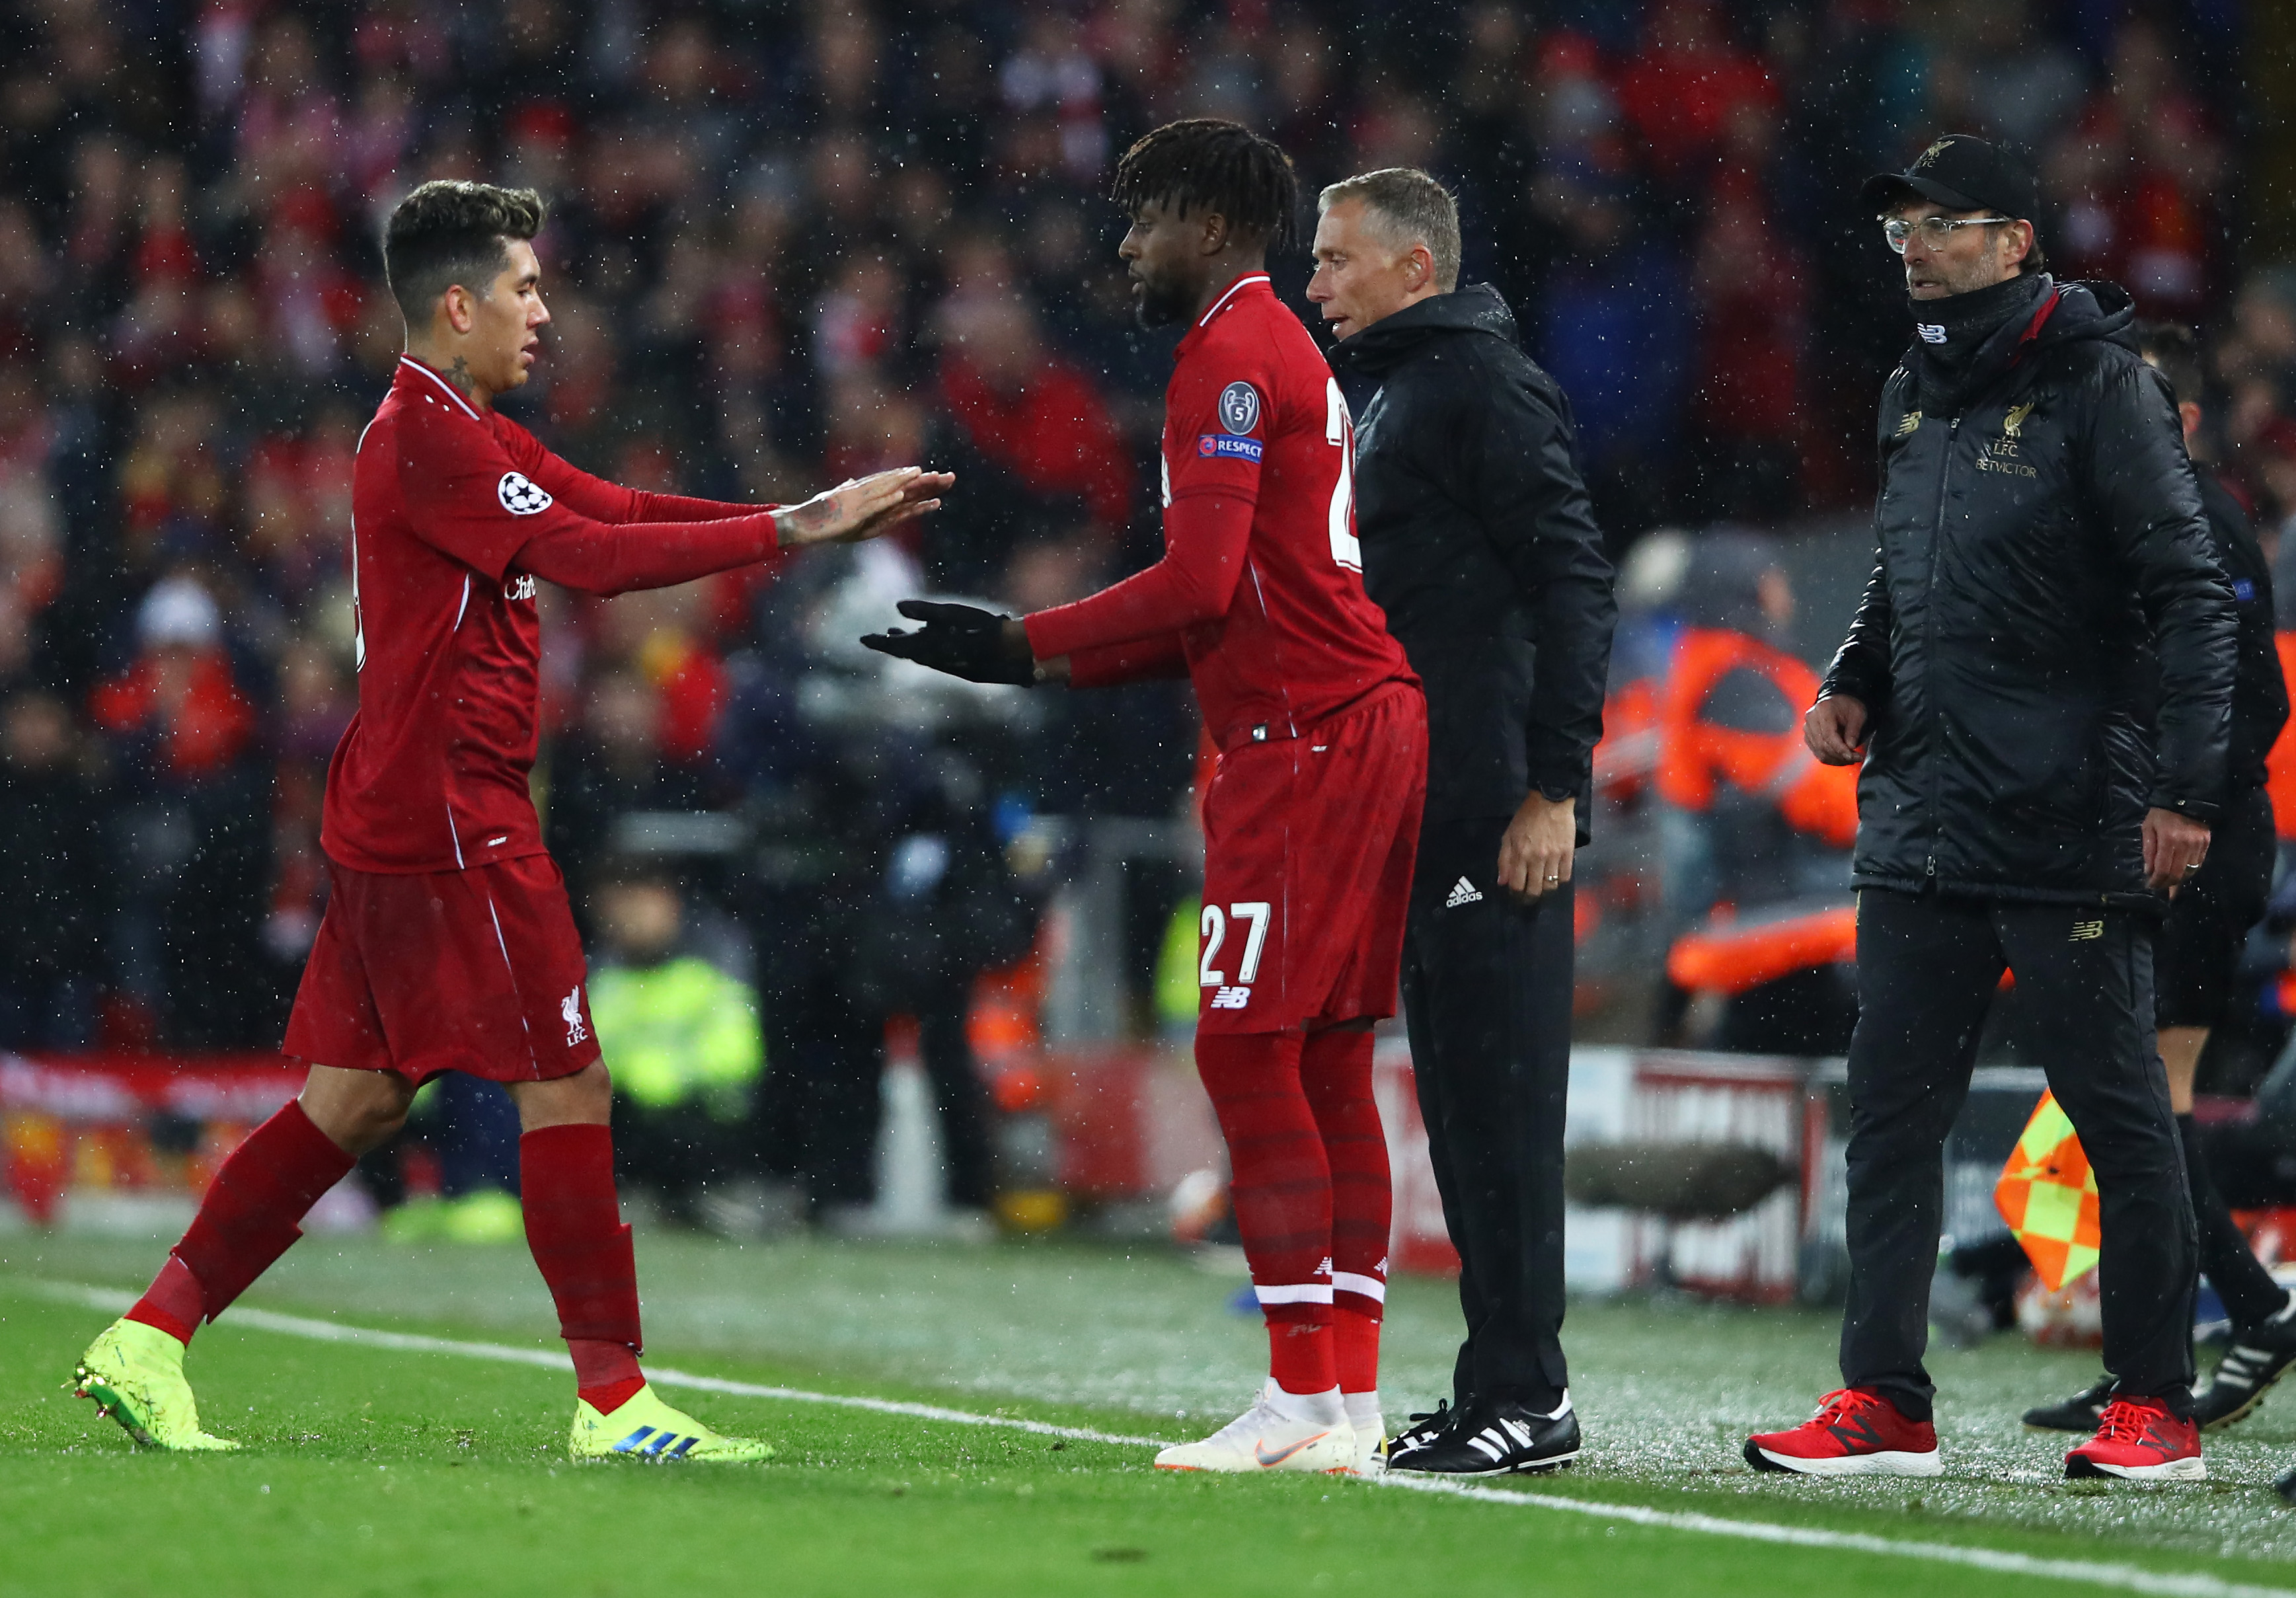 LIVERPOOL, ENGLAND - FEBRUARY 19:  Subsitute Divock Origi of Liverpool replaces Roberto Firmino during the UEFA Champions League Round of 16 First Leg match between Liverpool and FC Bayern Muenchen at Anfield on February 19, 2019 in Liverpool, England. (Photo by Clive Brunskill/Getty Images)